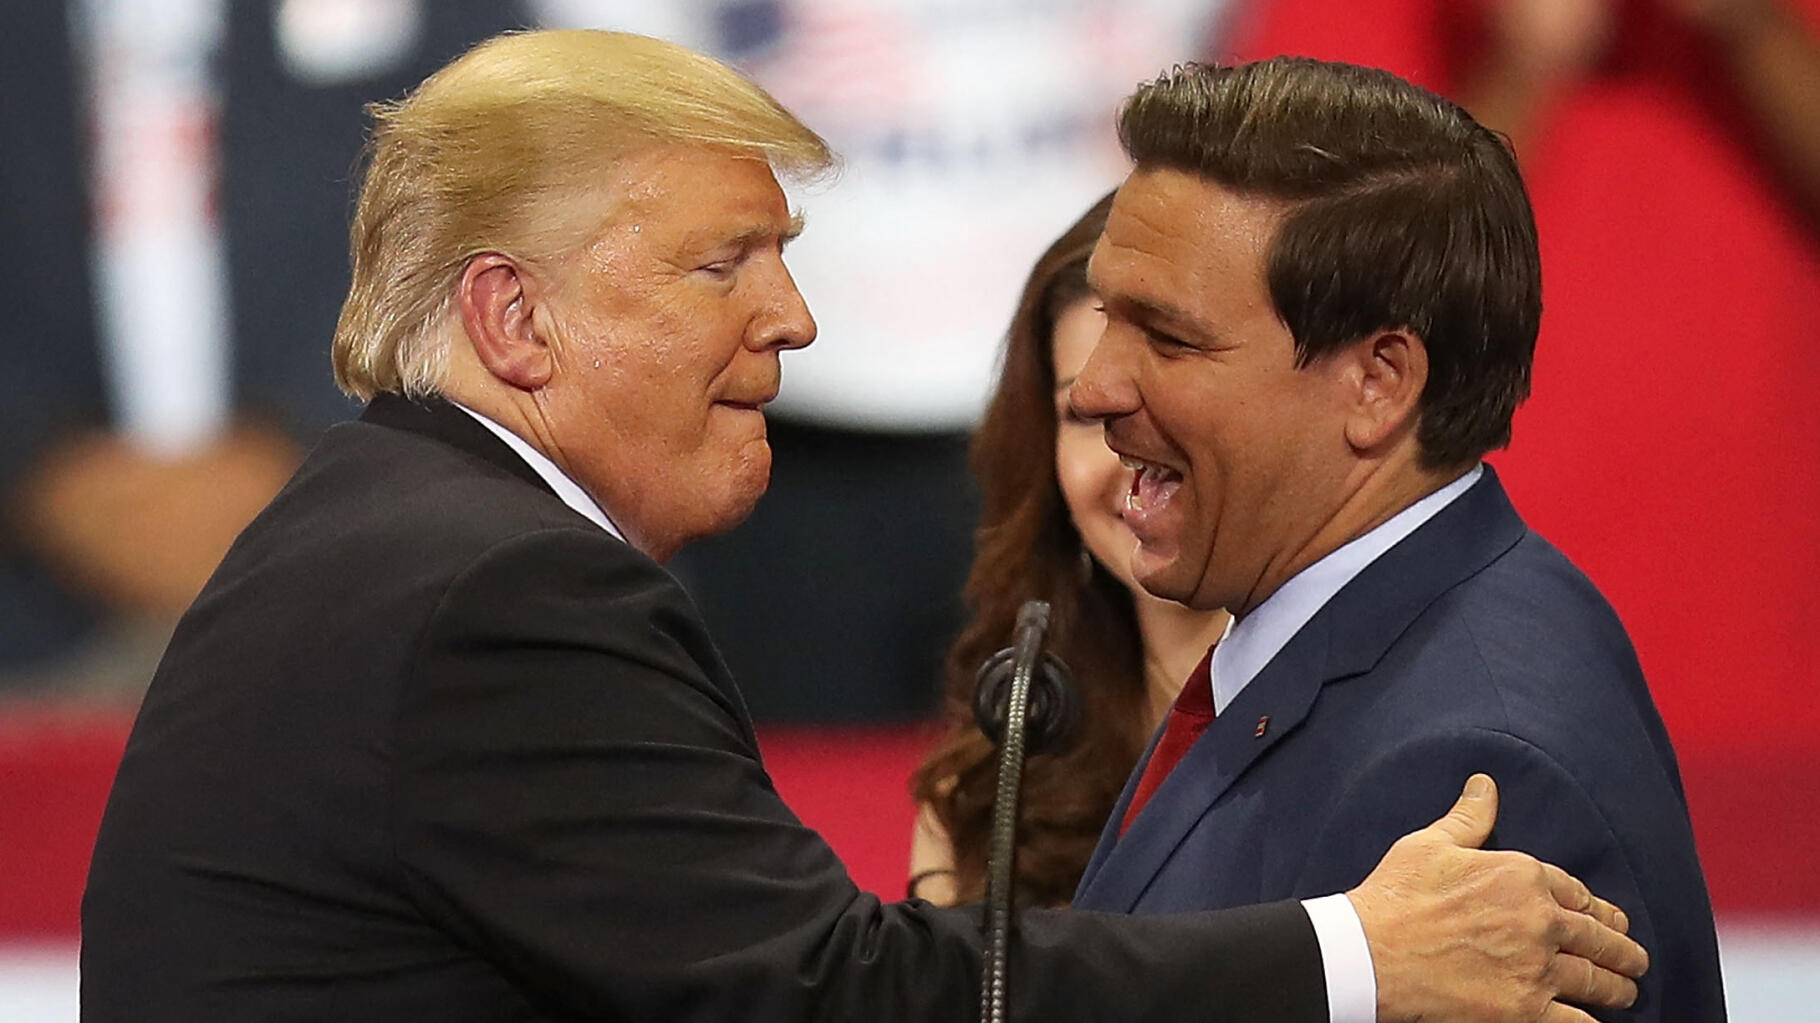 DeSantis takes aim at Trump in a duel (with help from Musk) for the 2024 US presidency